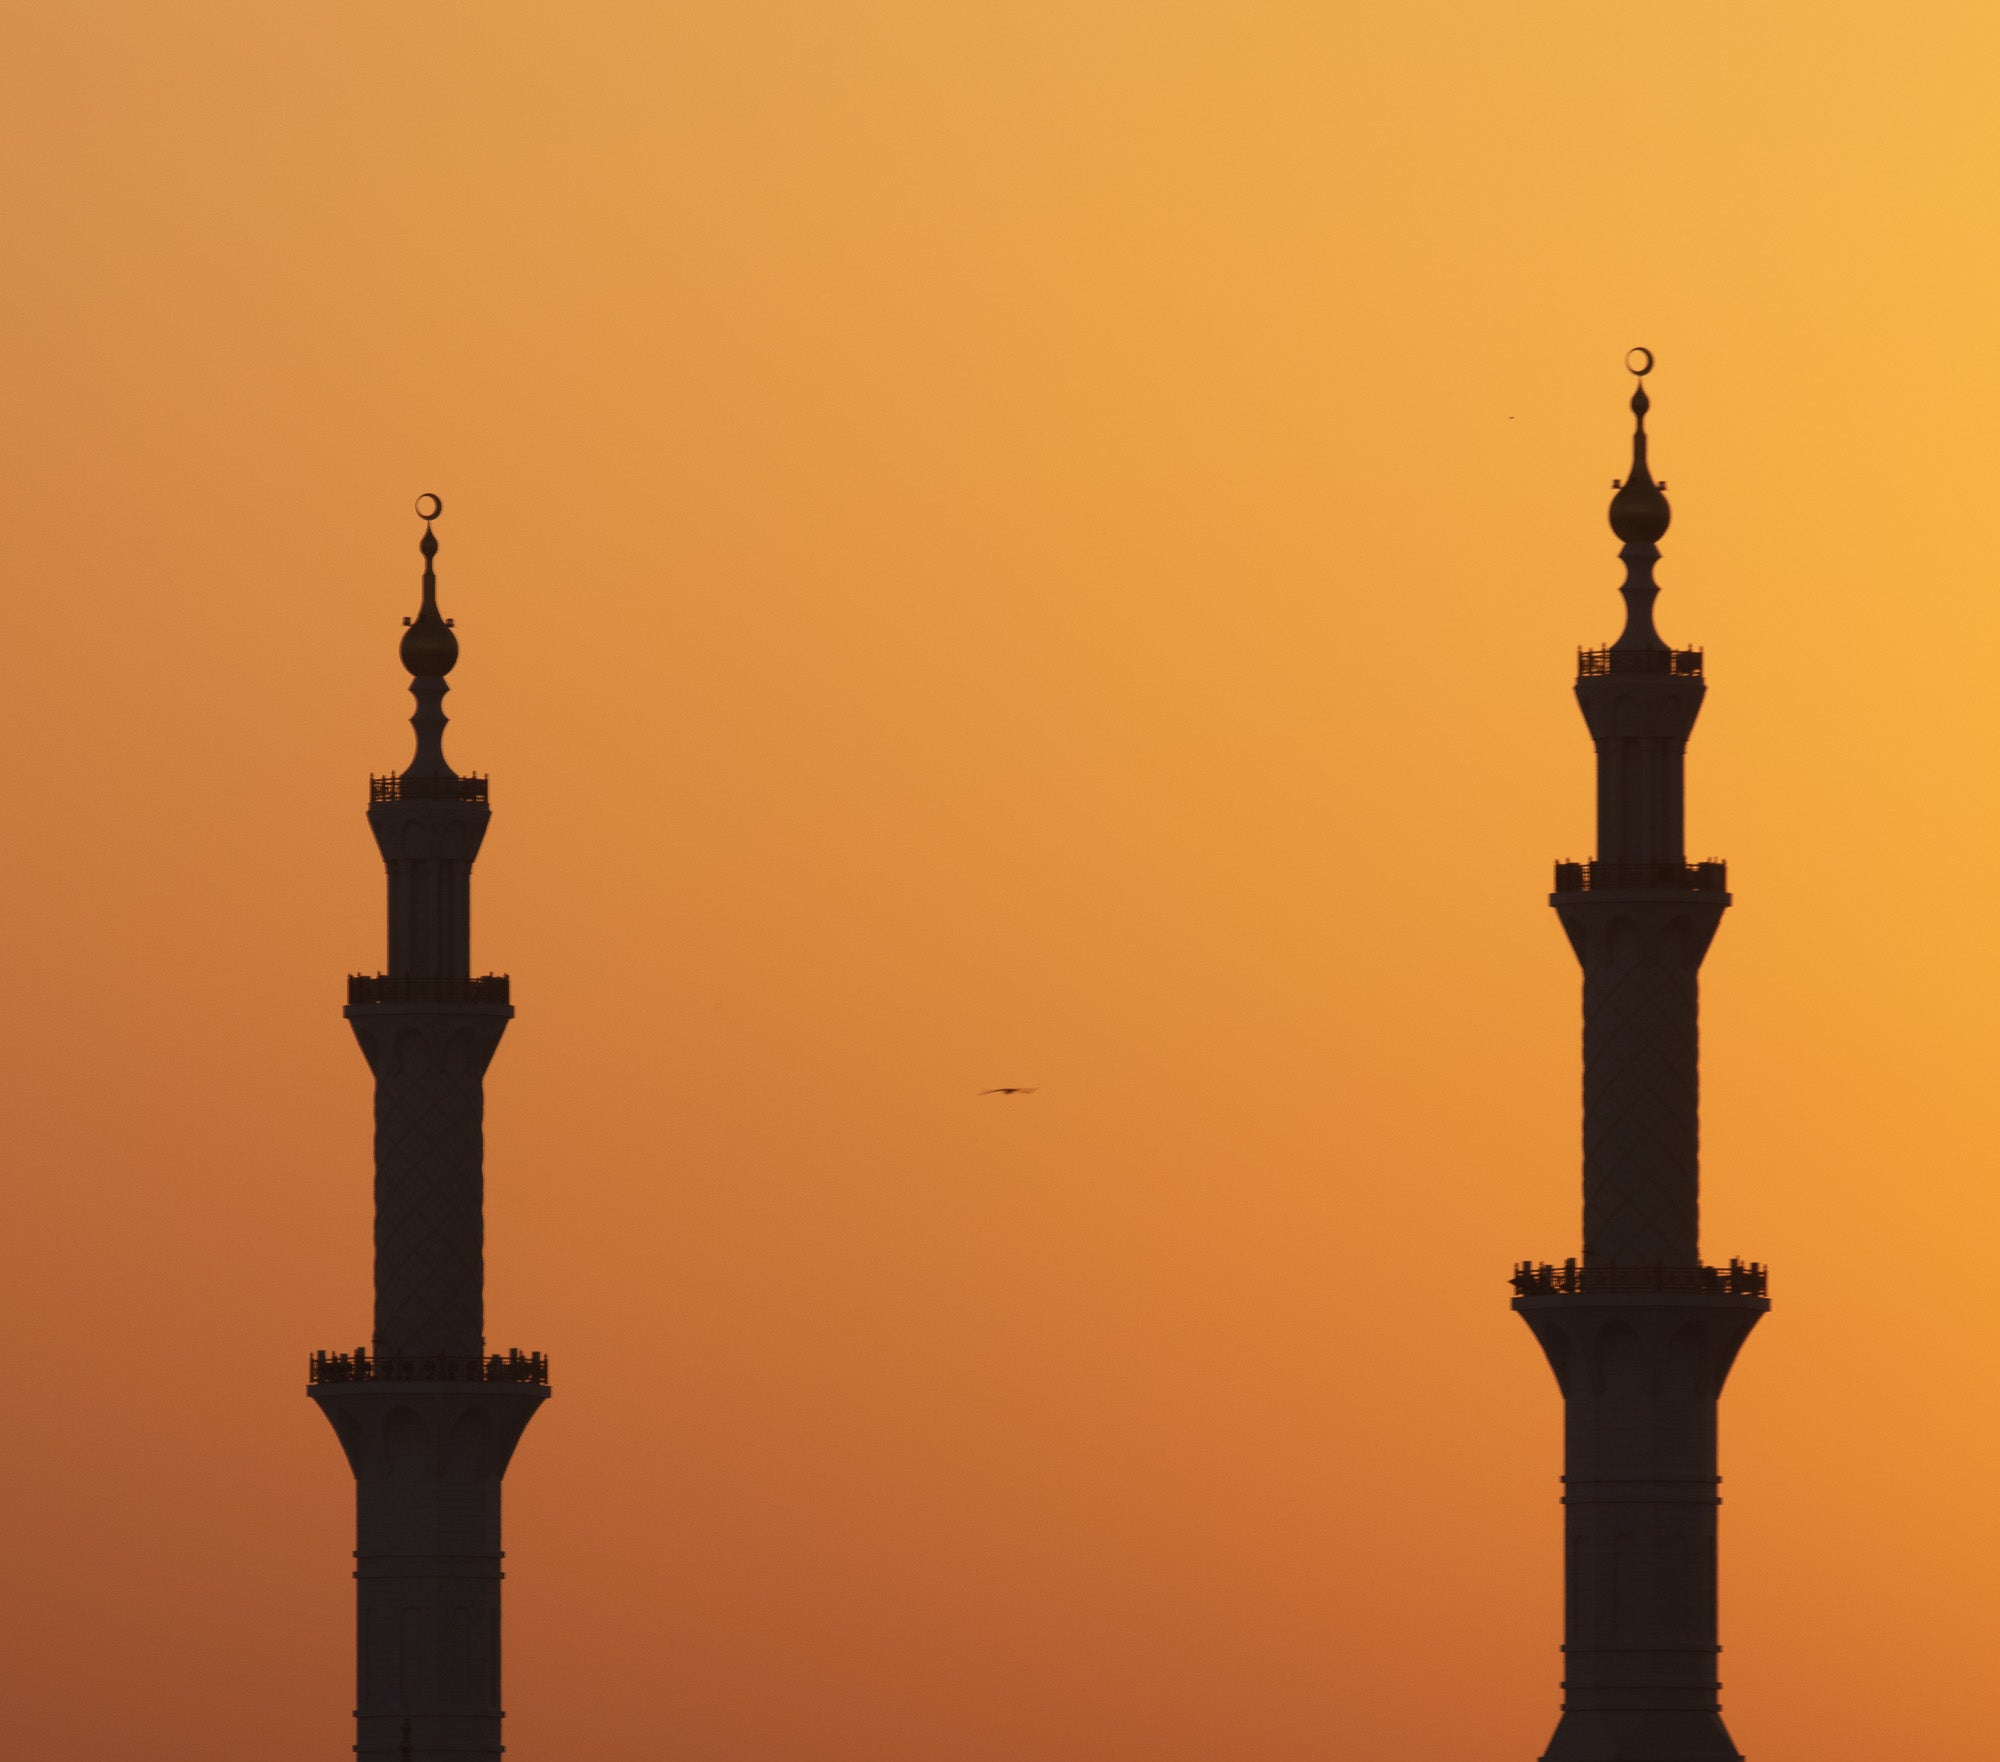 Silhouettes of two minarets against an orange sunset sky in Abu Dhabi.